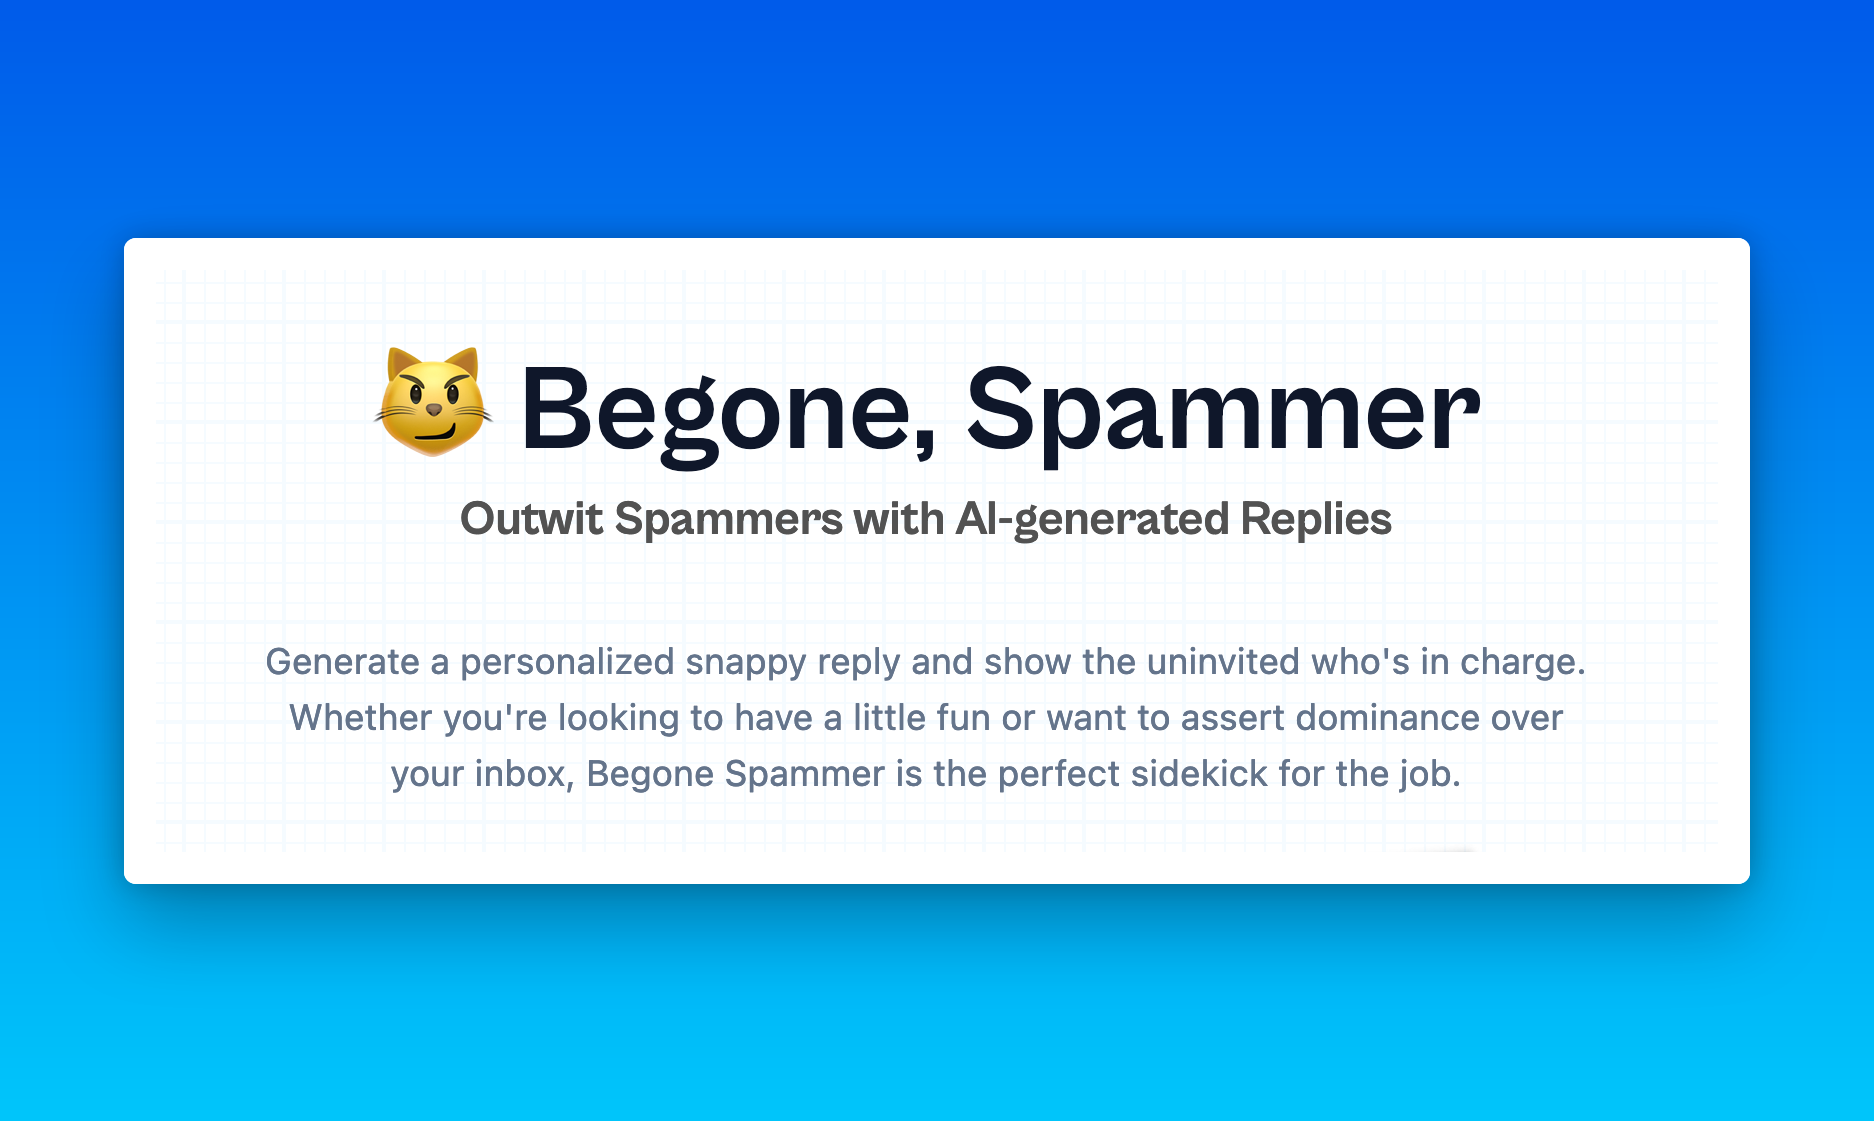 Begone, Spammer - Product Information, Latest Updates, and Reviews 2023 |  Product Hunt